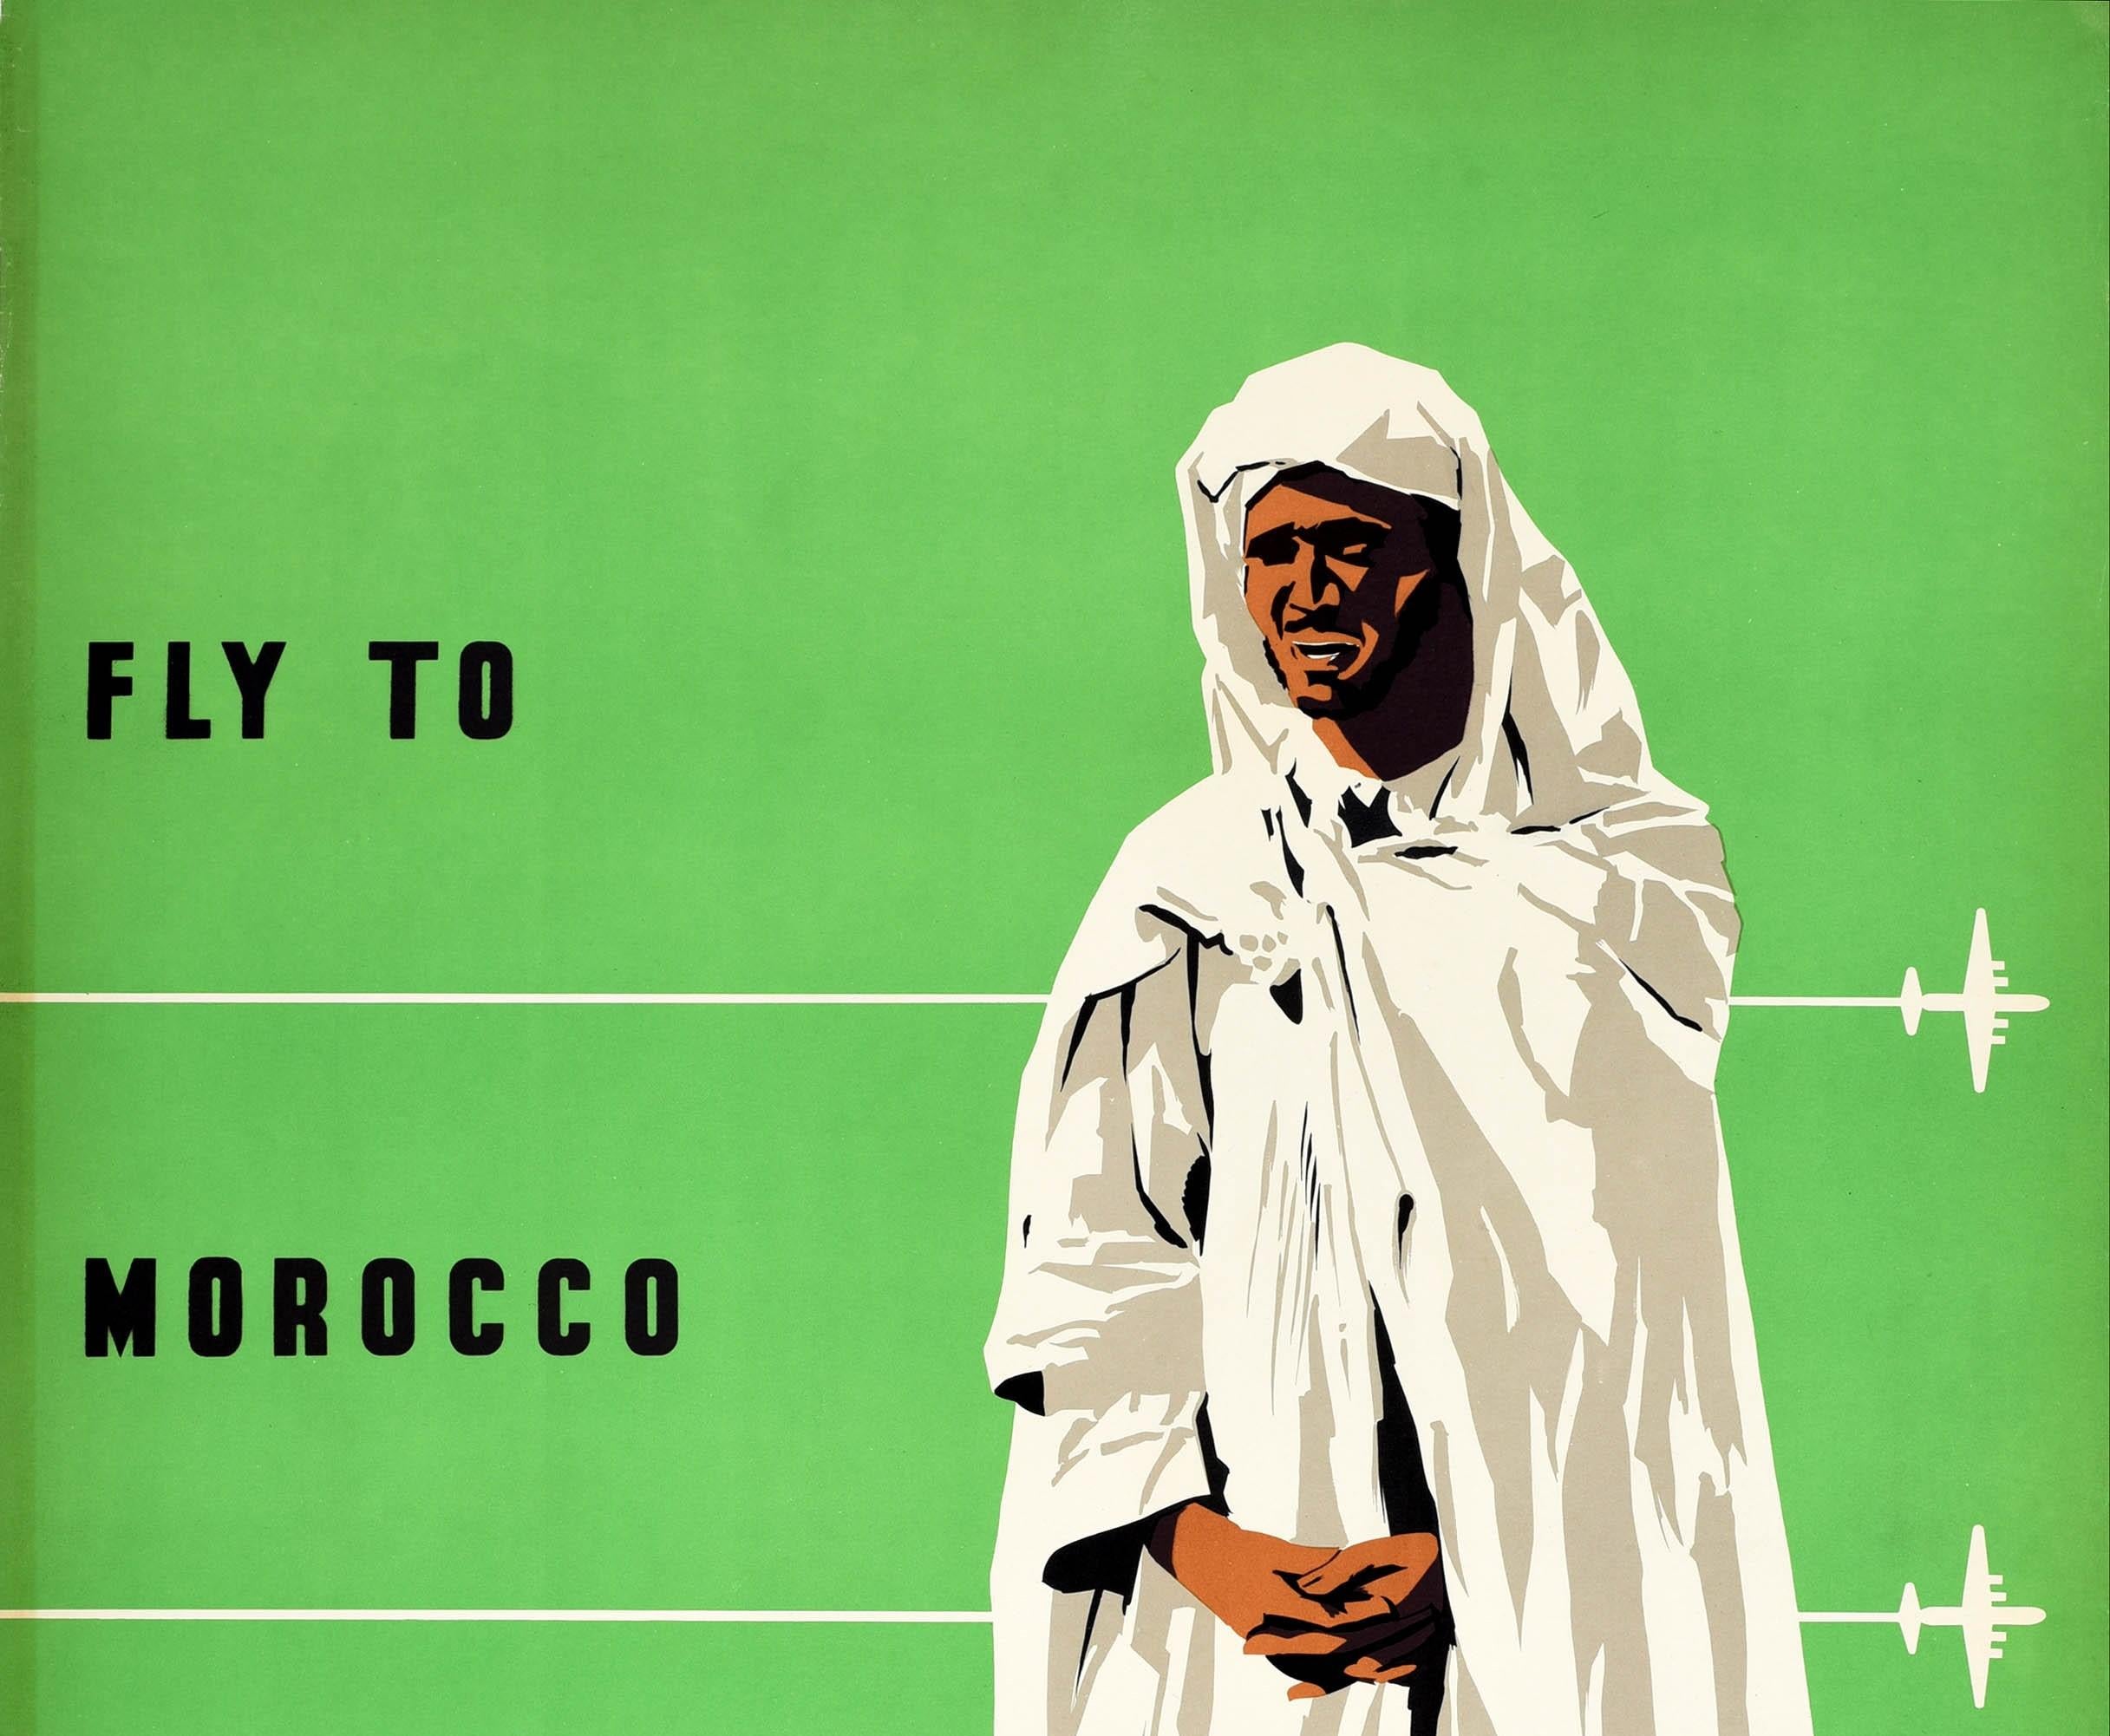 Original vintage travel poster - Fly to Morocco by Sabena Belgian Air Lines Casablanca Marrakech Rabat Fez Meknes - featuring a great design of a man in white in front of three stylised planes flying across the green background, the bold text on the